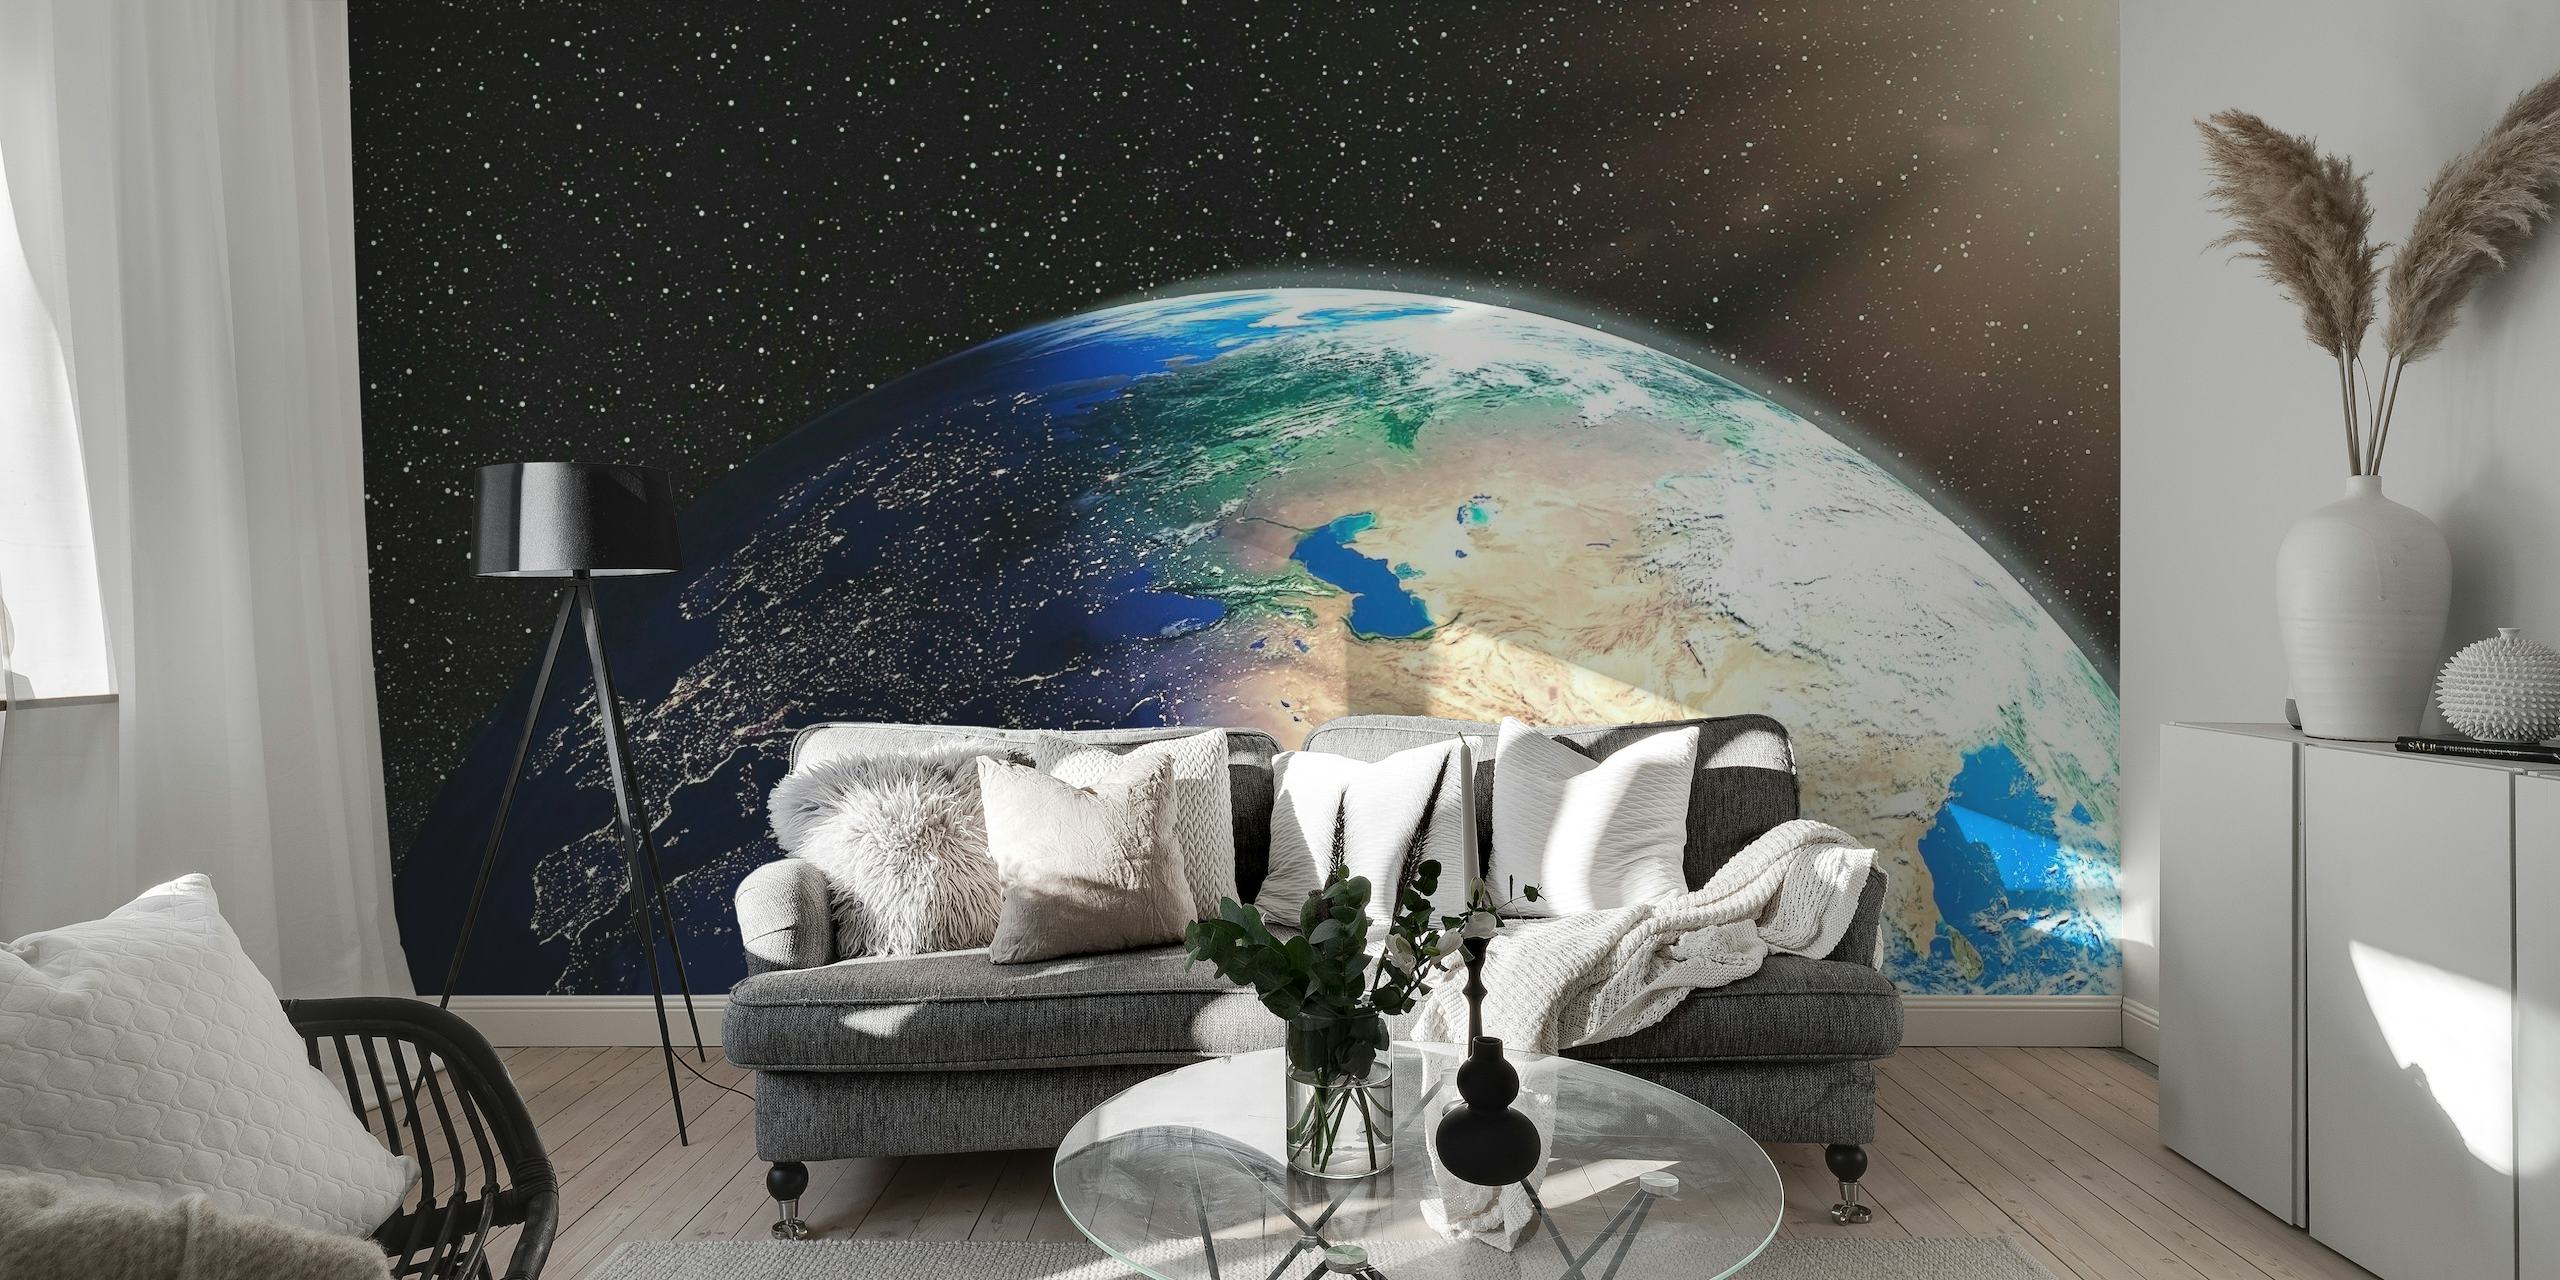 The Planet Earth wallpaper